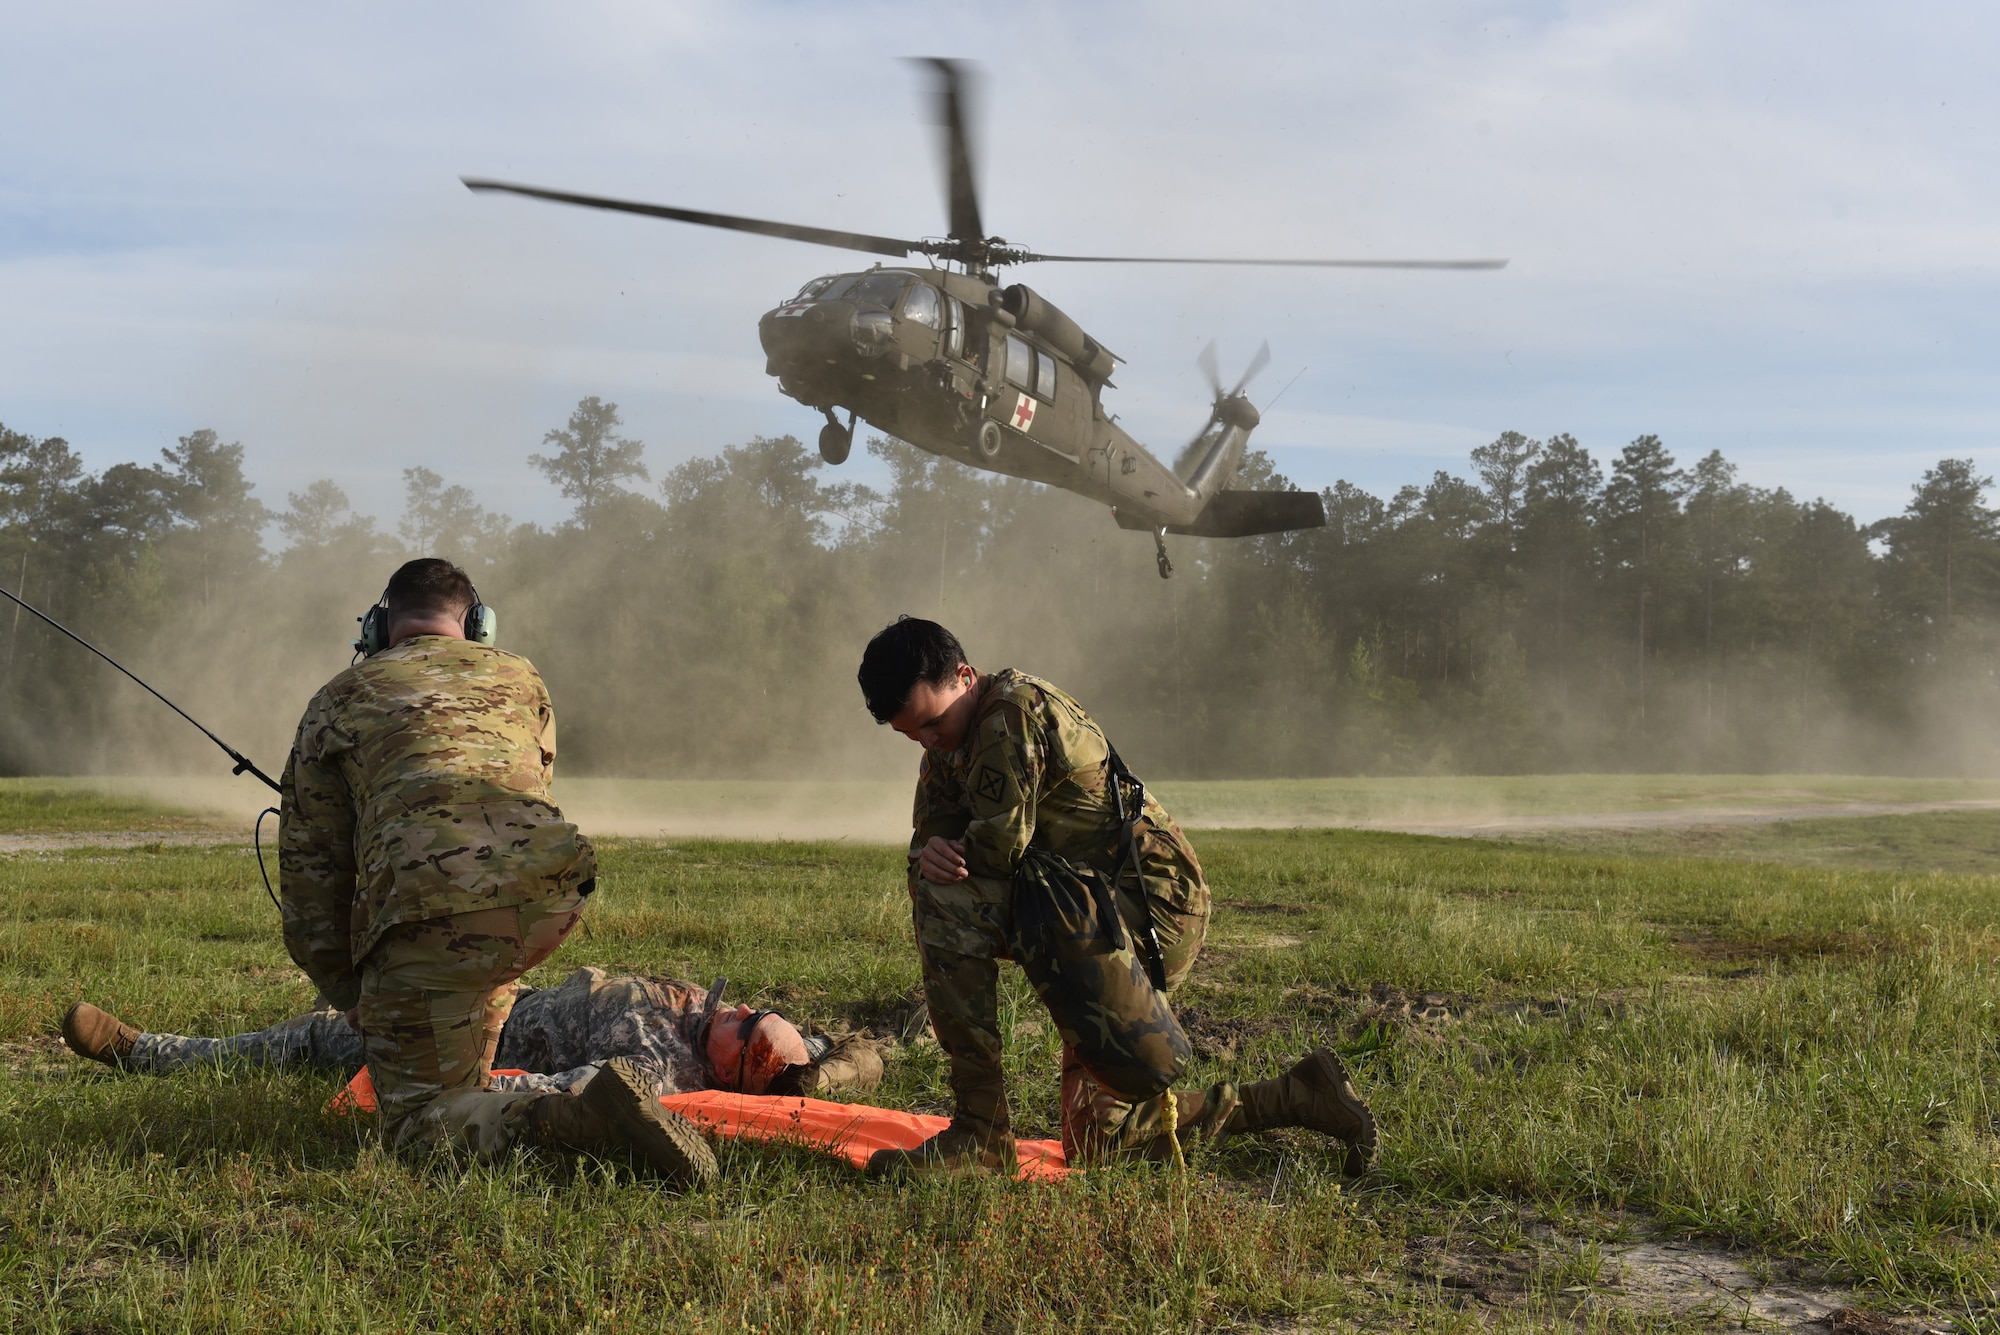 Soldiers with Company G, 3d Battalion, 238th Aviation Regiment, Mississippi Army National Guard, conduct MEDEVAC operations training as part of Southern Strike 2021 at Camp Shelby Joint Forces Training Center, April 22, 2021. Southern Strike is a large-scale, conventional and special operations exercise designed to maintain combat readiness, build relationships, strengthen interoperability and prepare for possible future contingency missions  (Temporary unmasking for members is due to conflicts with mission requirements) 
(U.S. Army National Guard photo by Sgt. Victoria Smith)